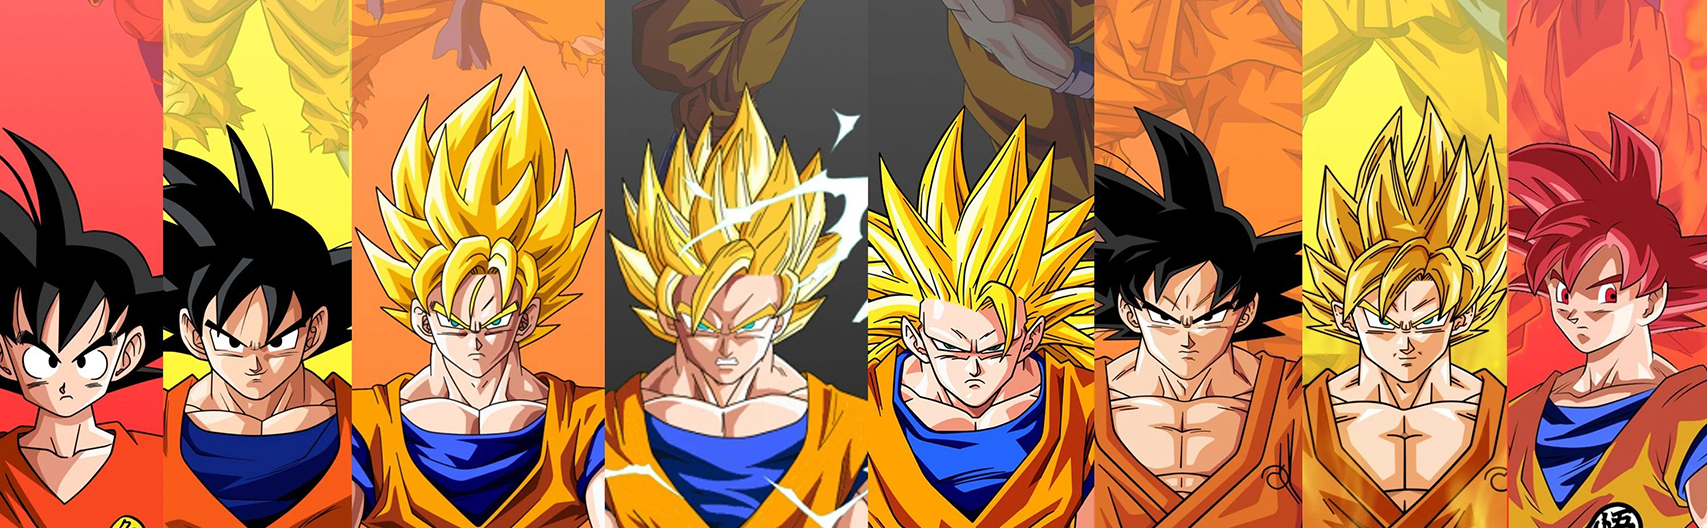 Goku Phases Wallpapers - Wallpaper Cave